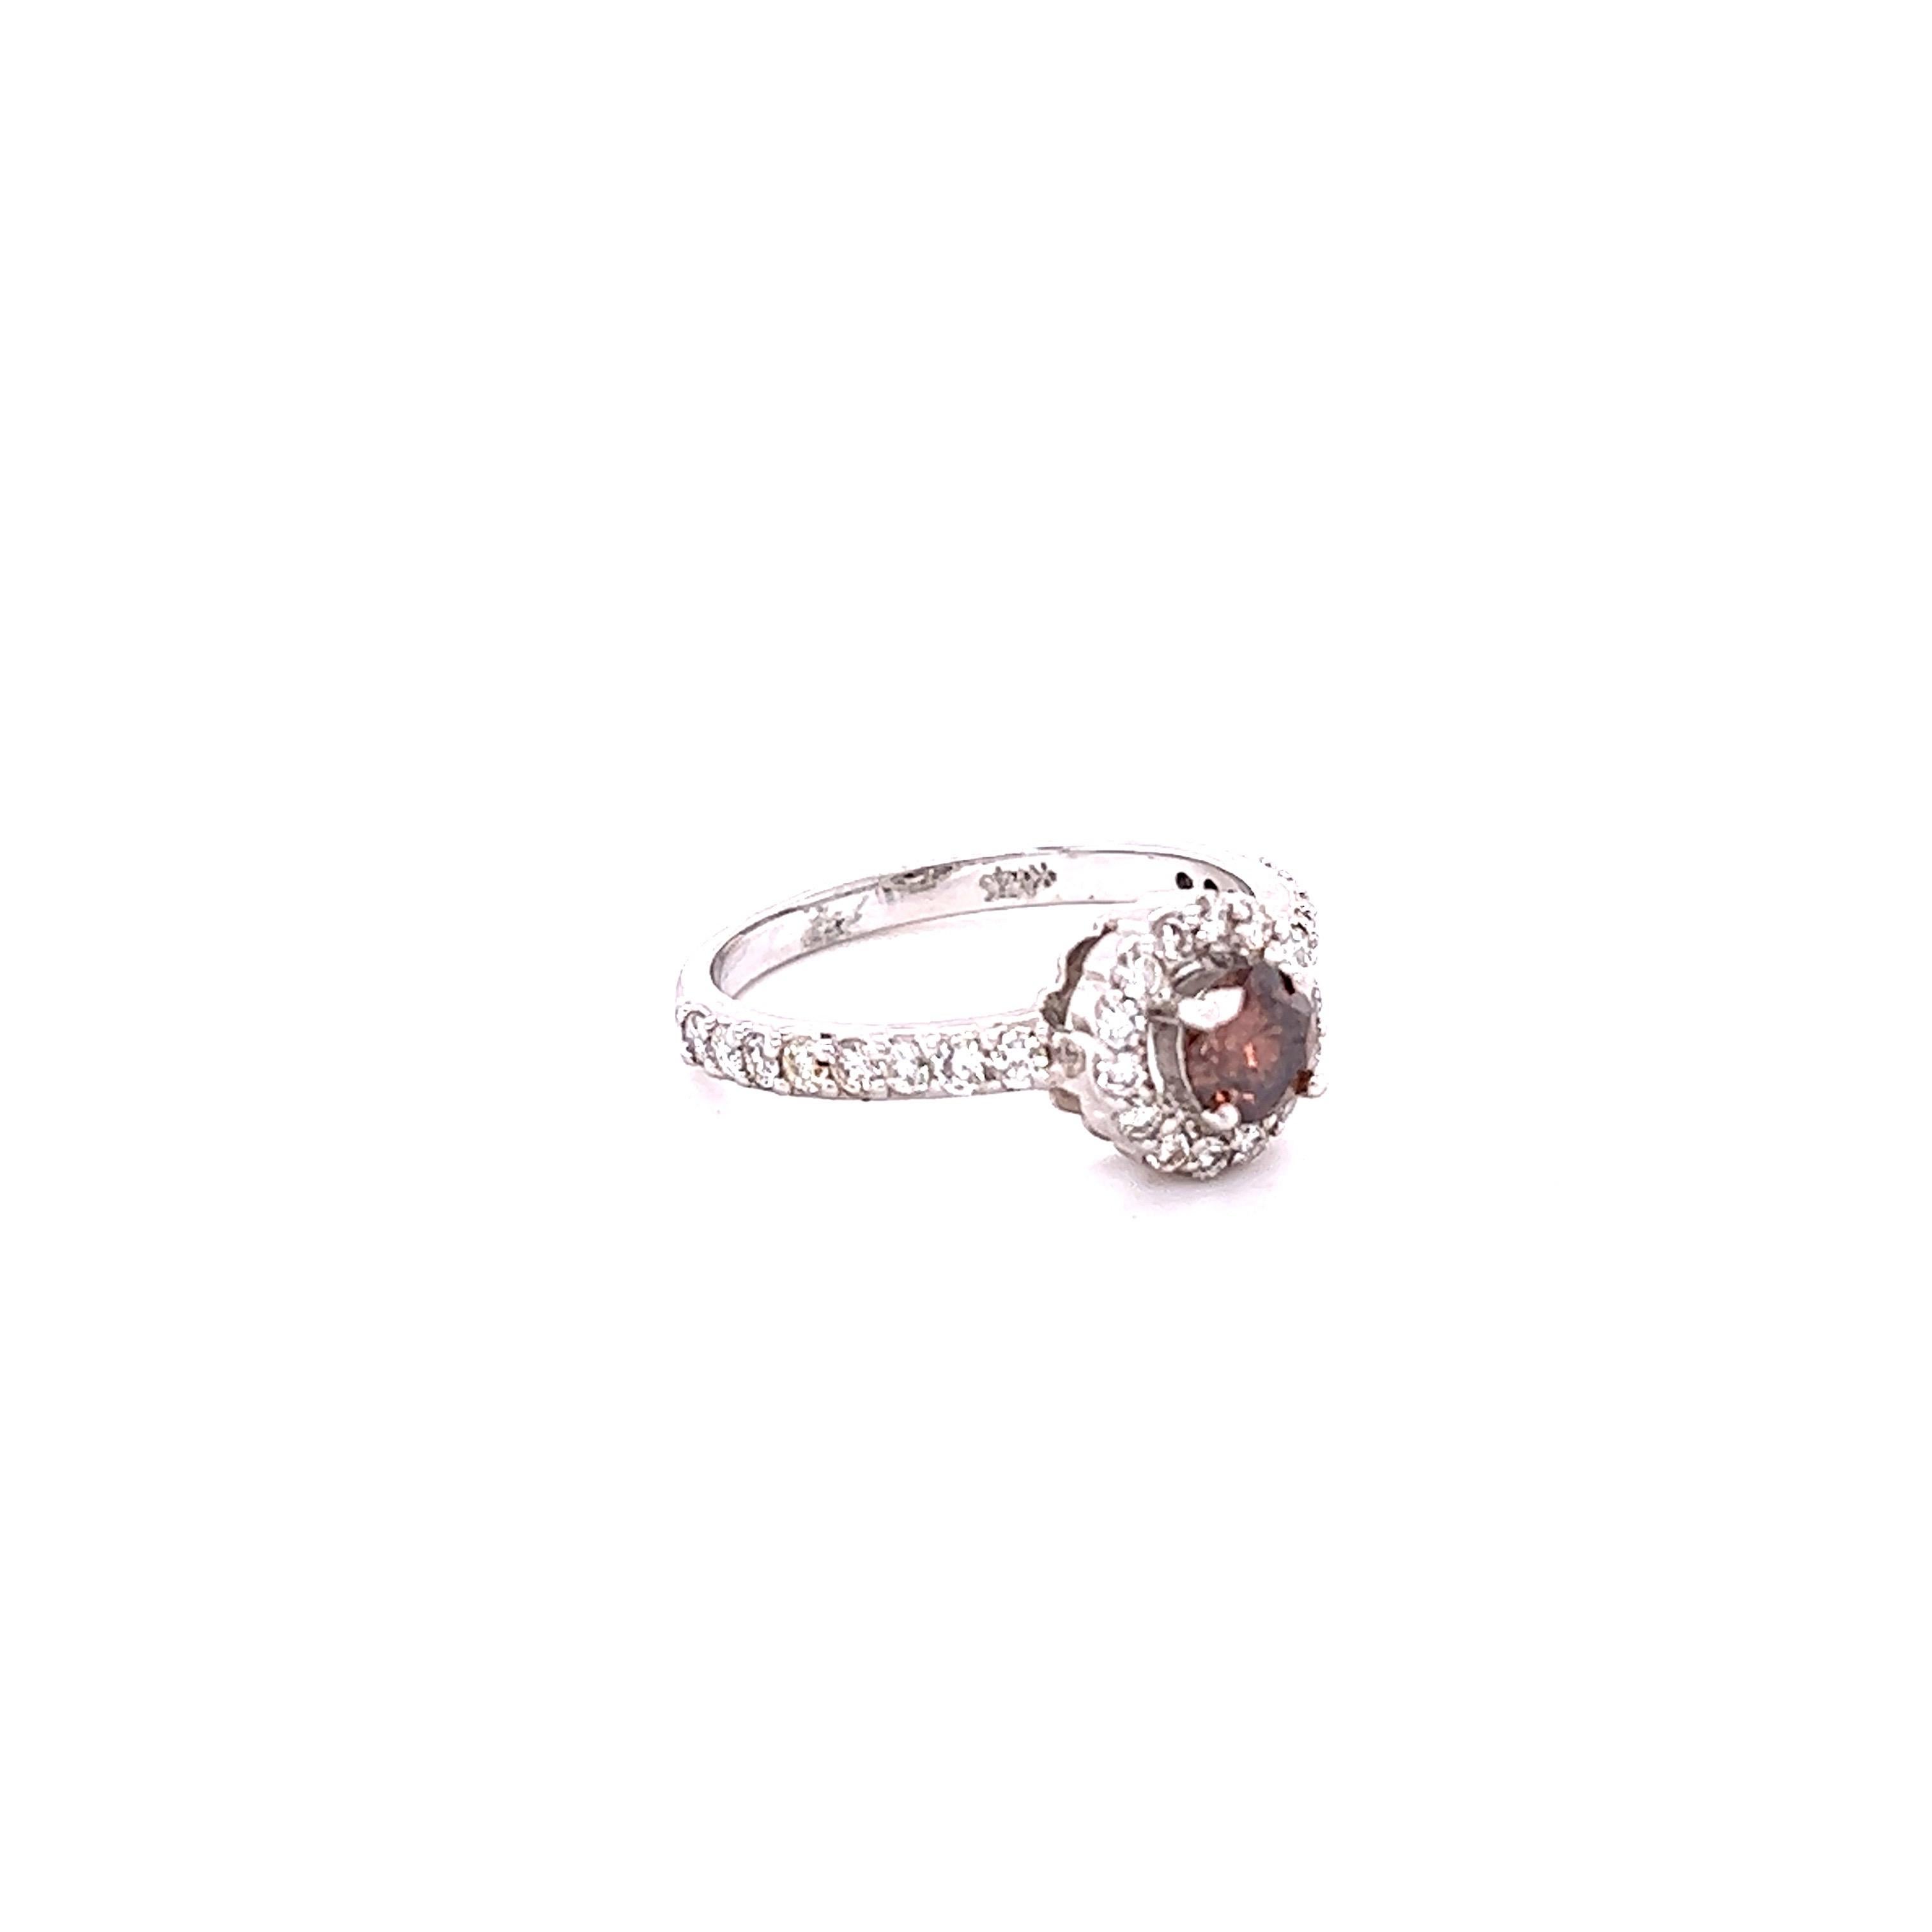 This beauty has a Round Cut Natural Brown Diamond that weighs 0.42 Carats and is surrounded by  30 Round Cut Diamonds that weigh 0.54 carats. The total carat weight of the ring is 0.96 carats. 

The ring is curated in 14 Karat White Gold and weighs